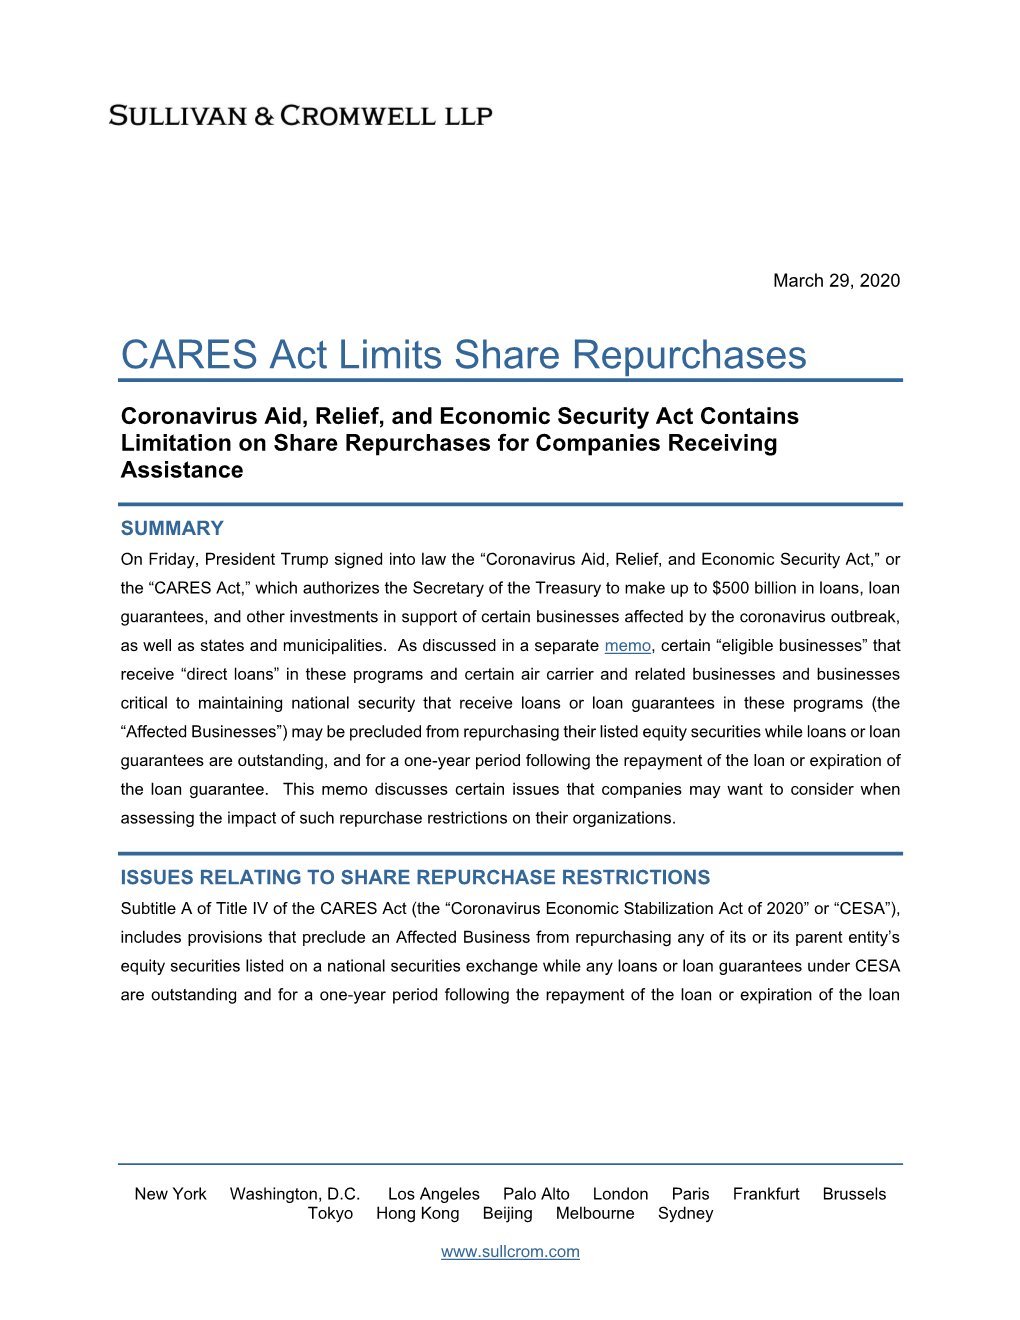 CARES Act Limits Share Repurchases